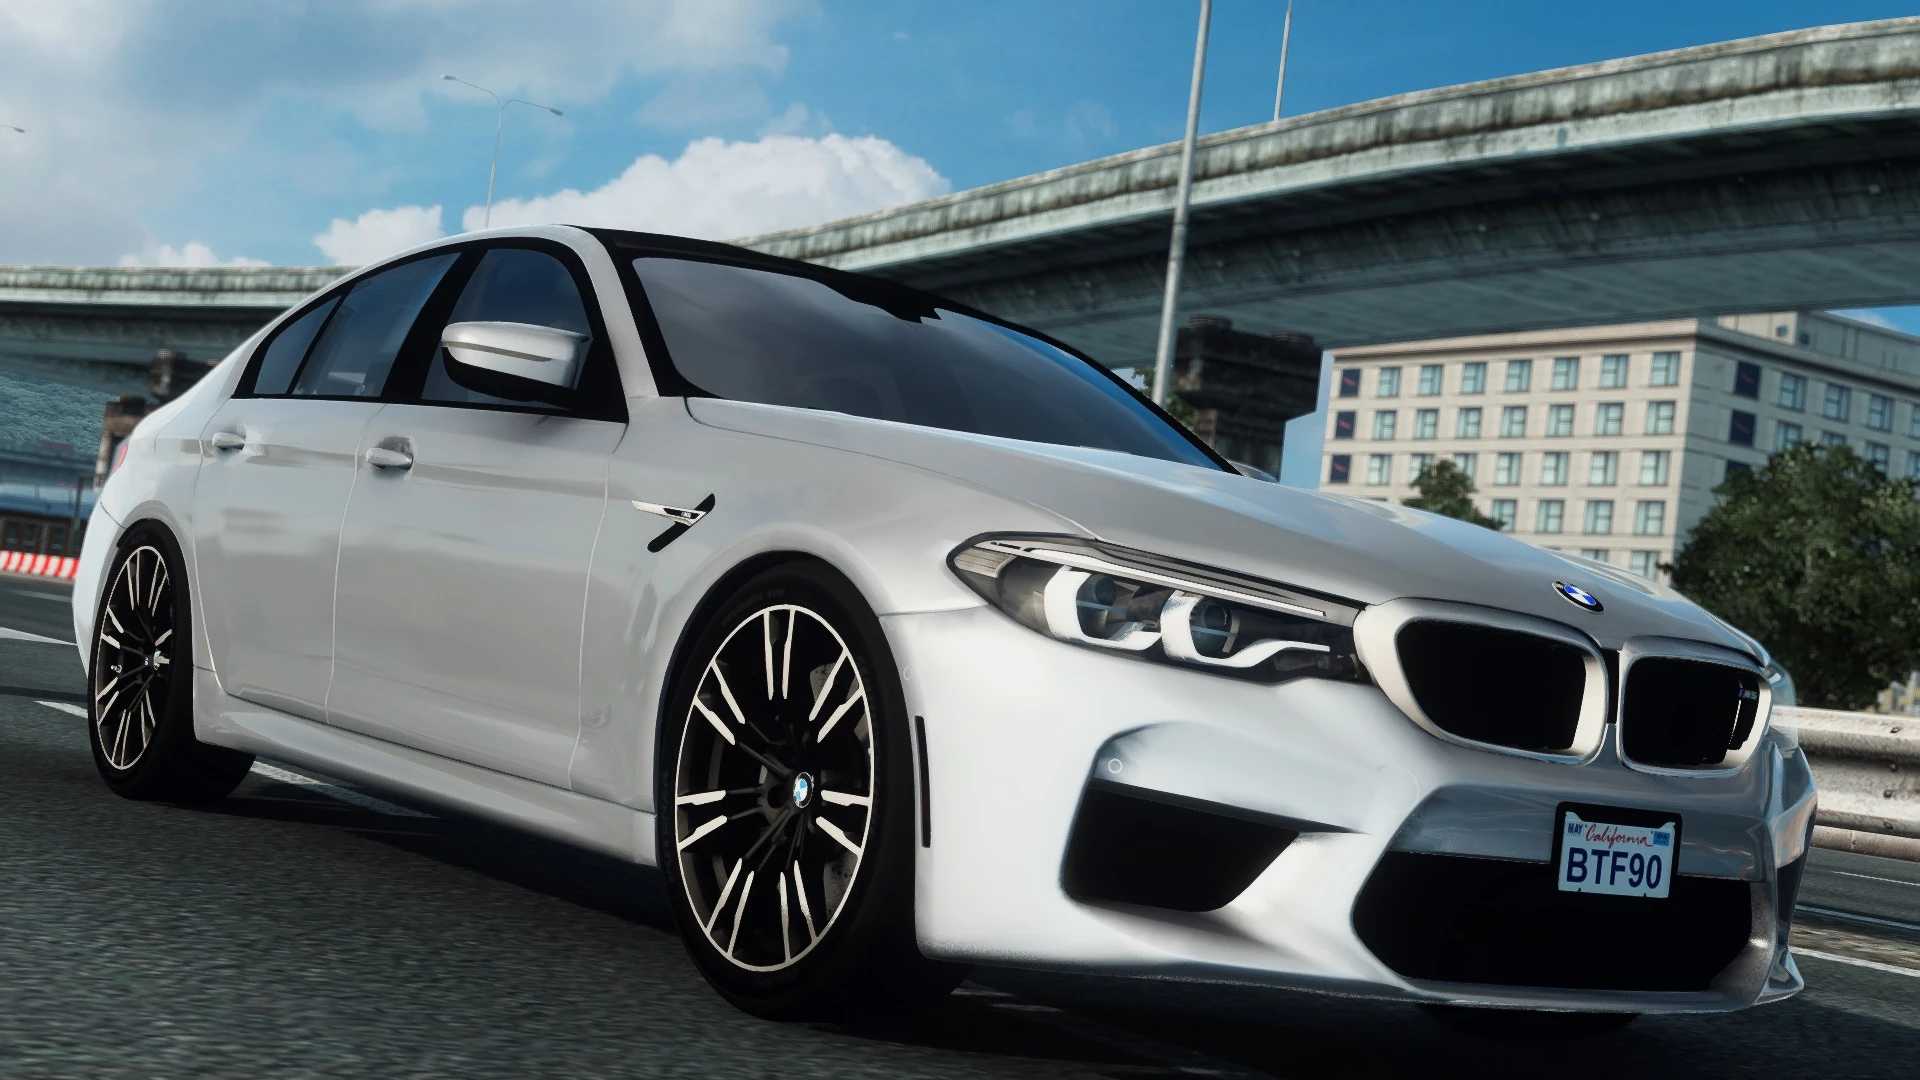 Бмв м5 для етс 2. BMW m5 f90. BMW m5 f90 ETS 2. M5 f90. BMW m5 f90 Competition.